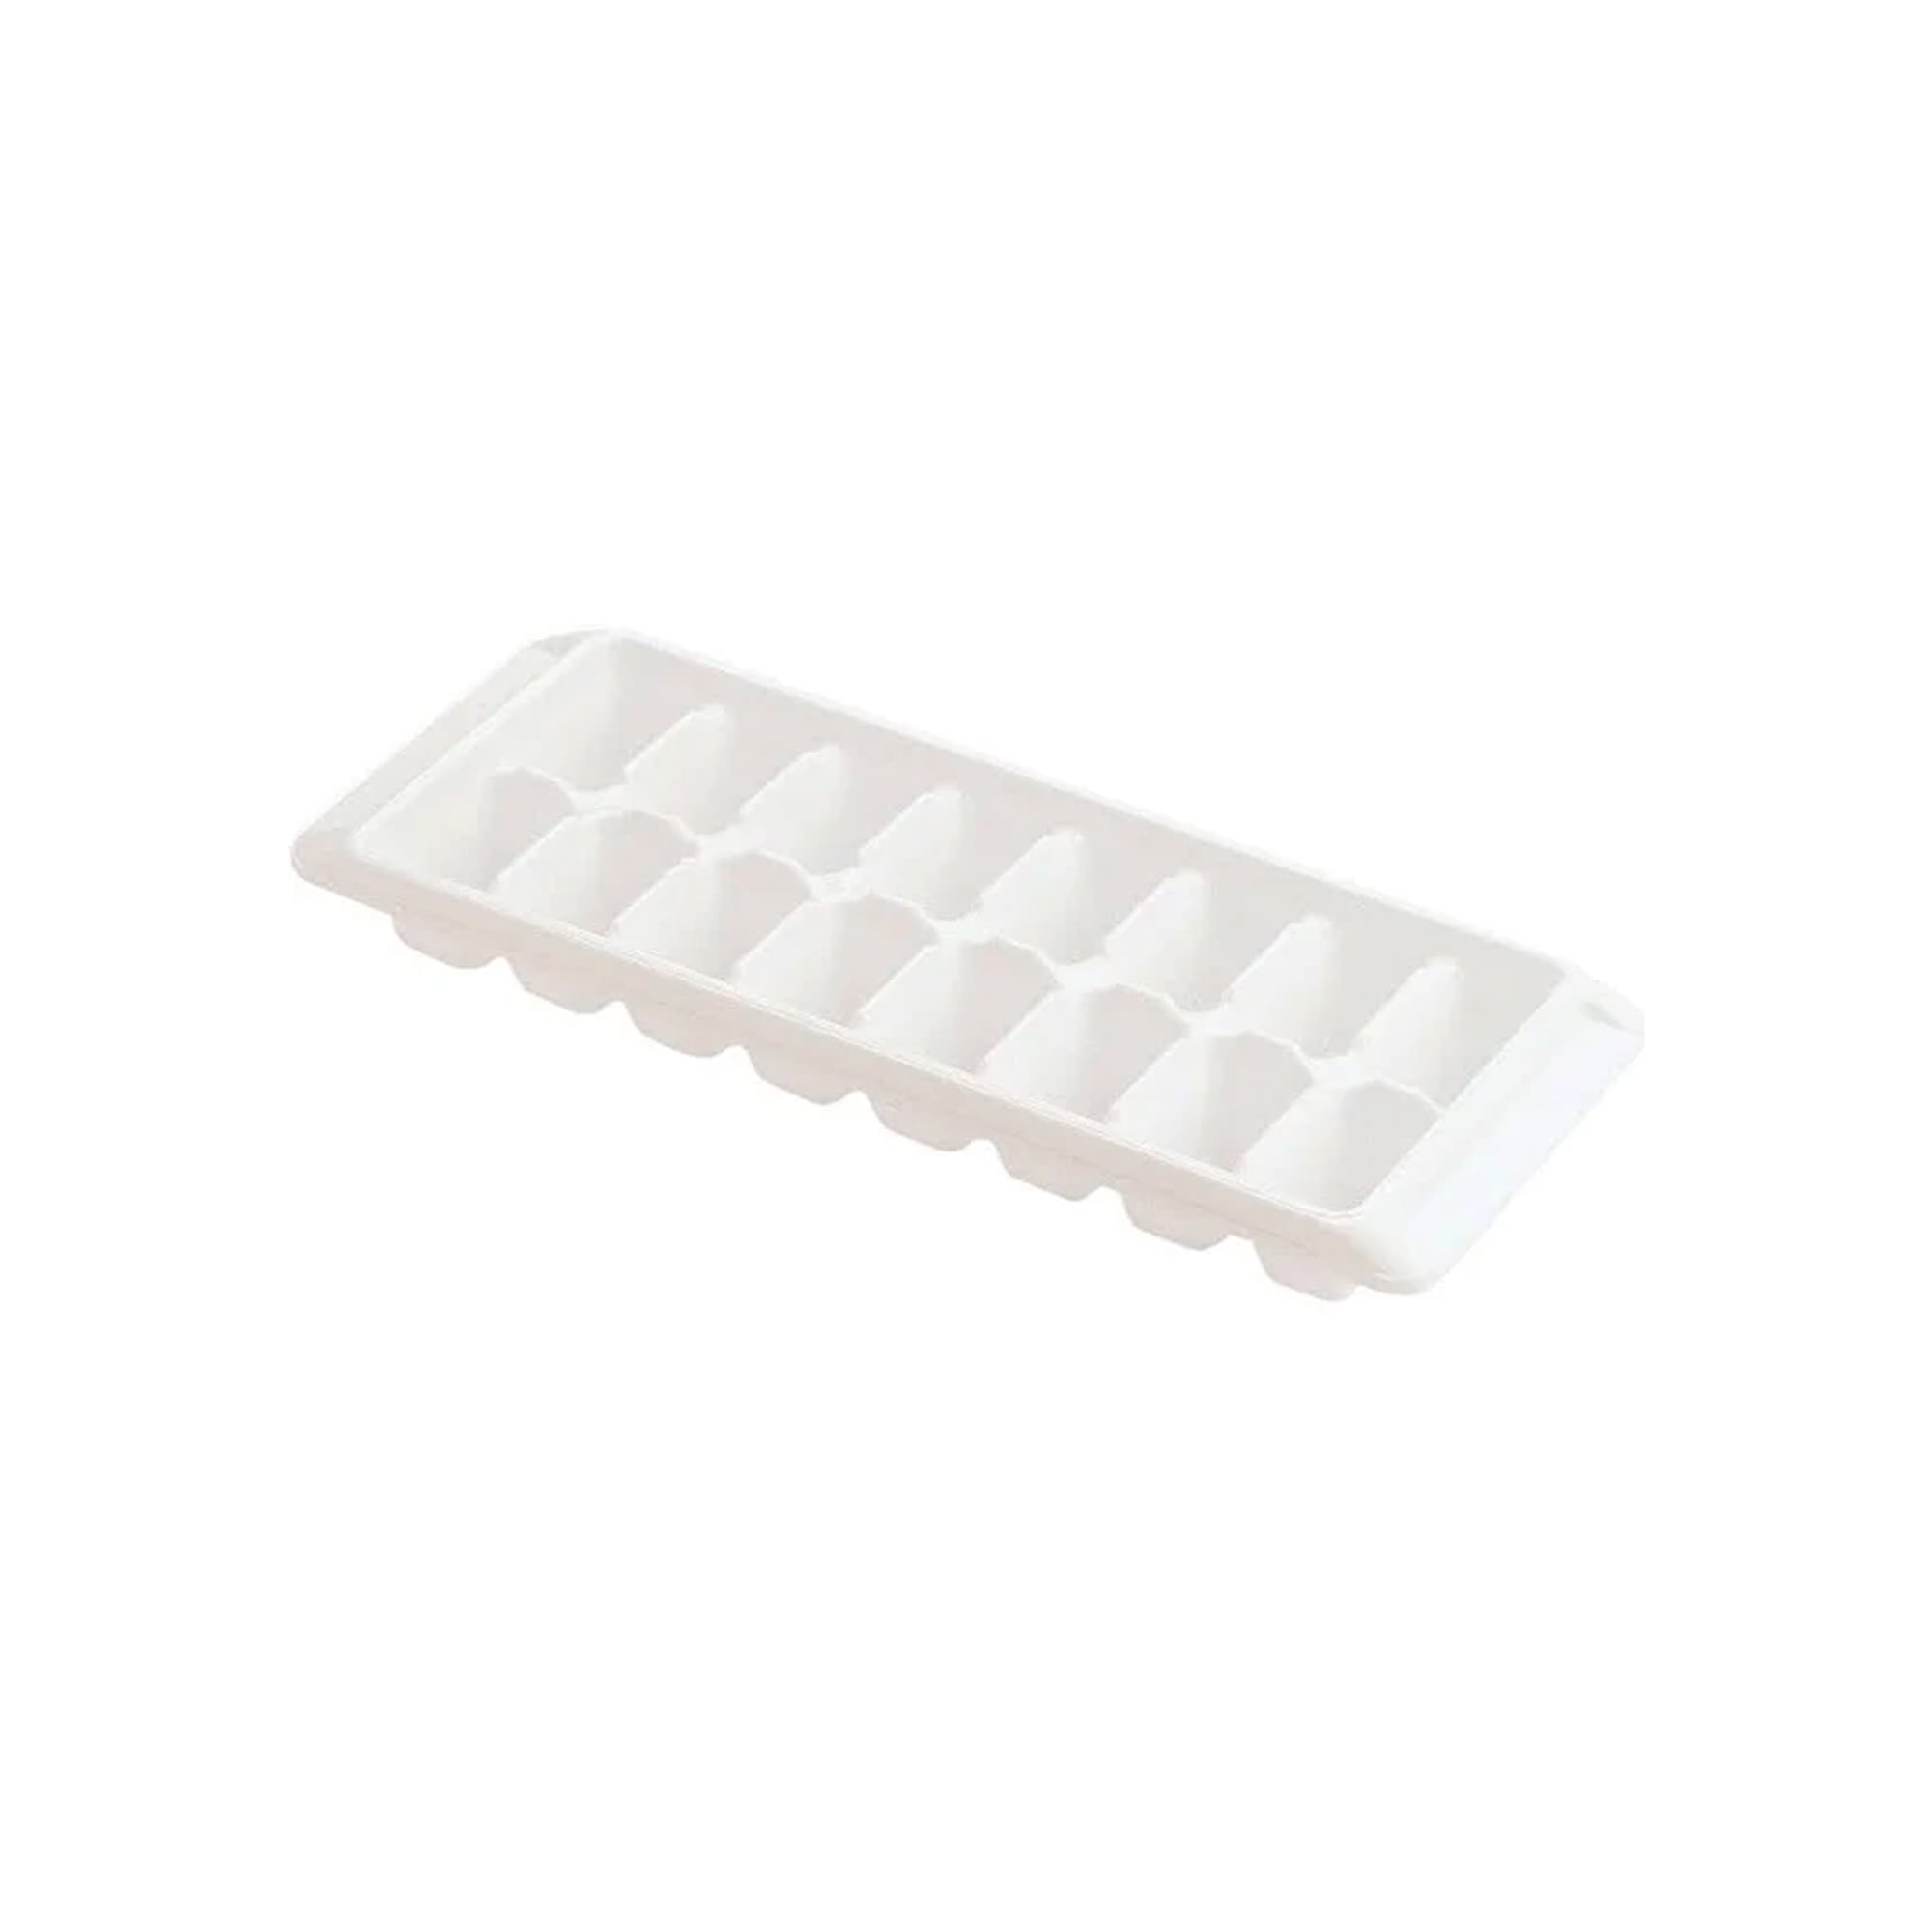 Pack of 4 Kitch Easy Release White Ice Cube Tray 2867-WHT-4 16 Cube Trays 